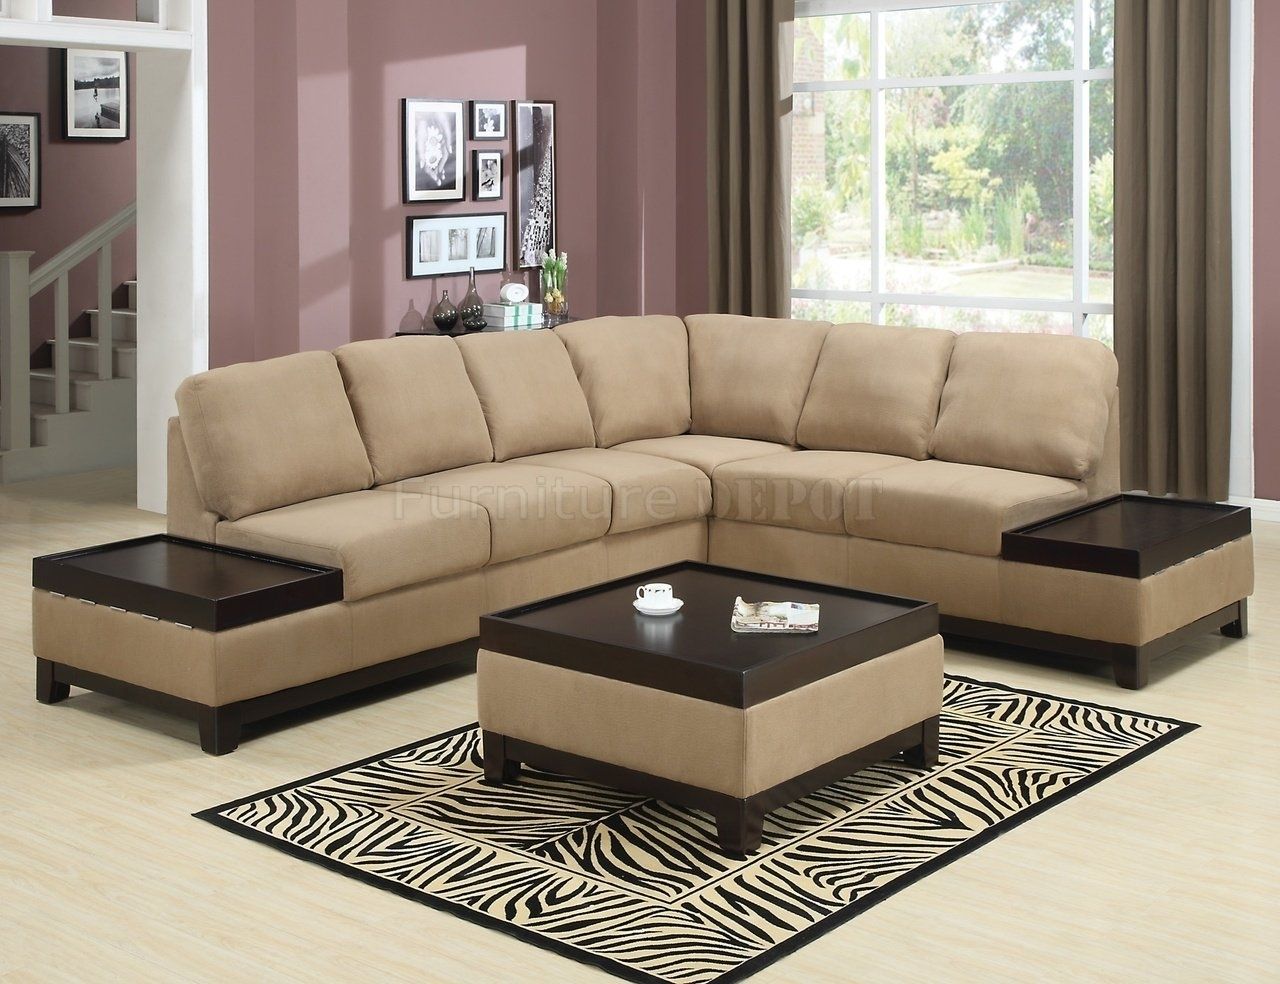 Stylish Sectional Sofas Tulsa – Buildsimplehome For Tulsa Sectional Sofas (Photo 1 of 10)